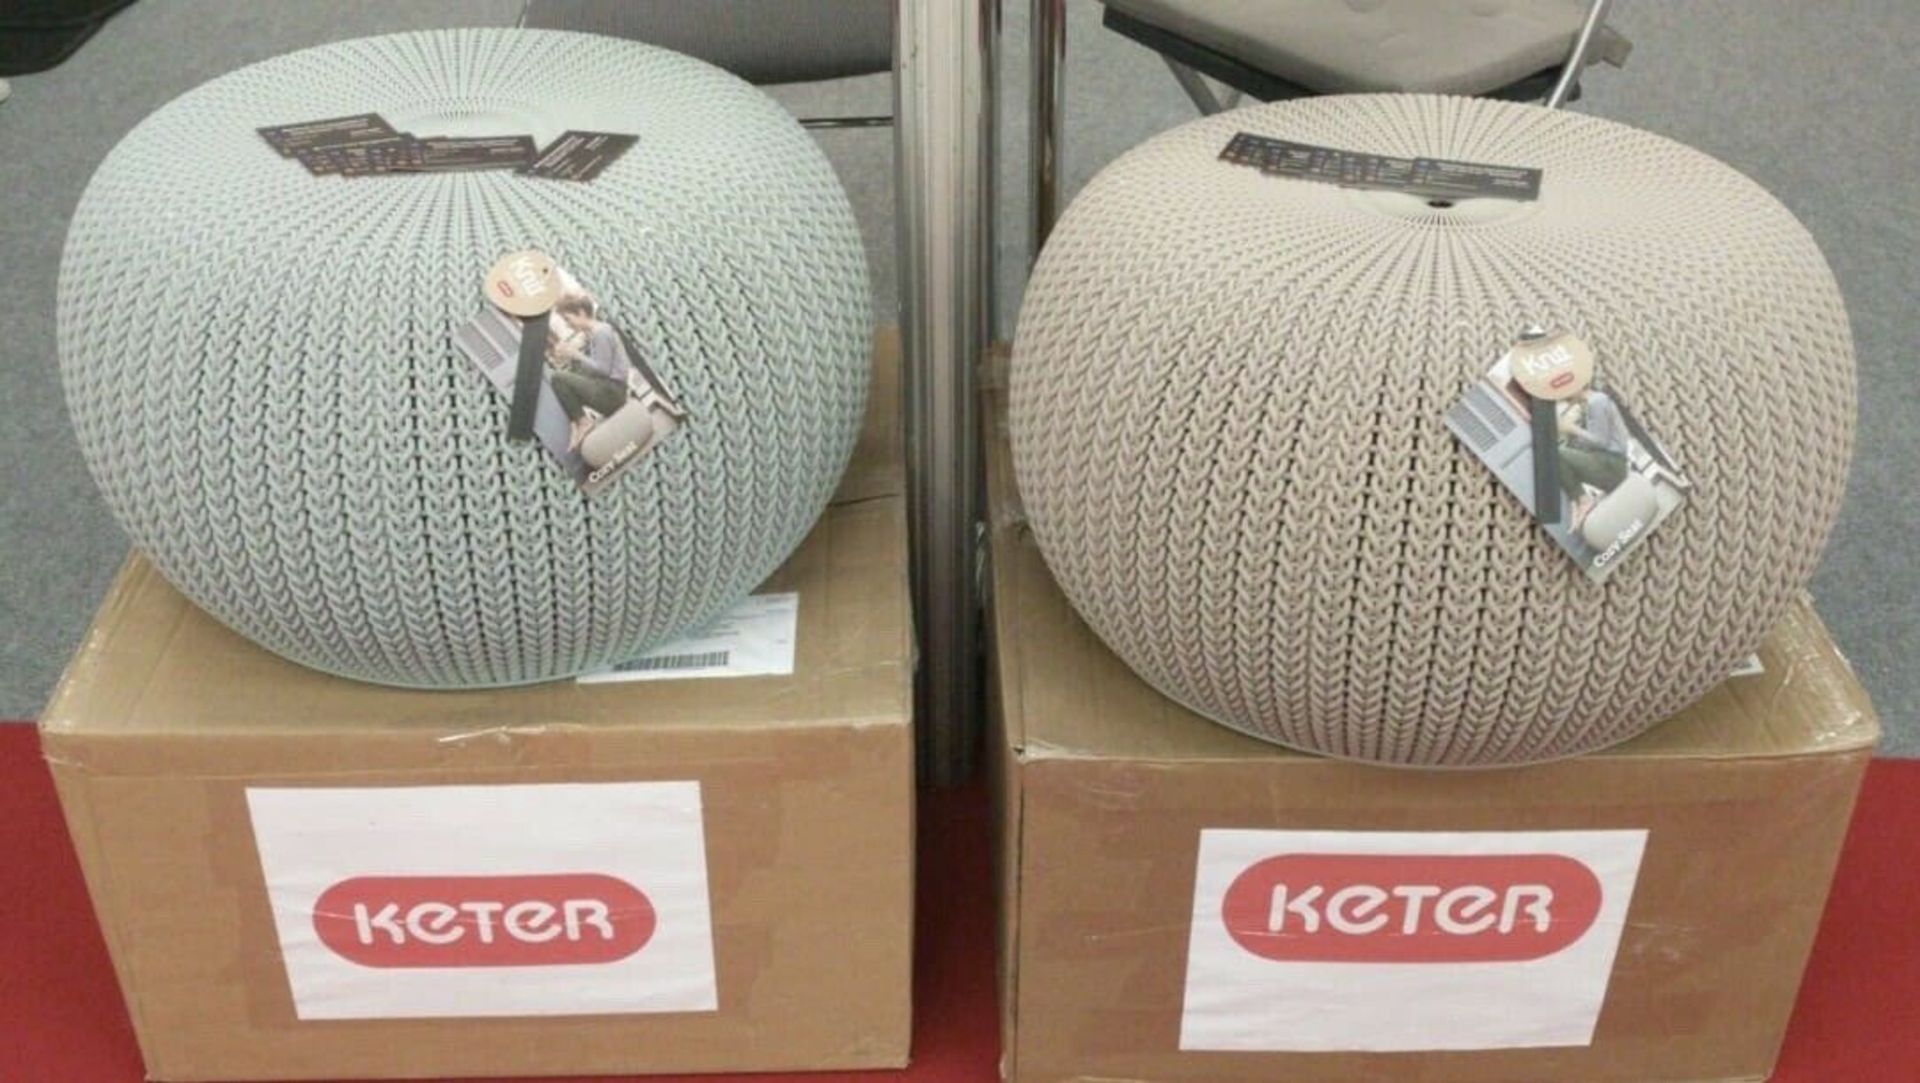 10pcs Brand new Keter Cozi Knit Seat in Beige & Pastel Blue - even mix given 5pcs each colour or